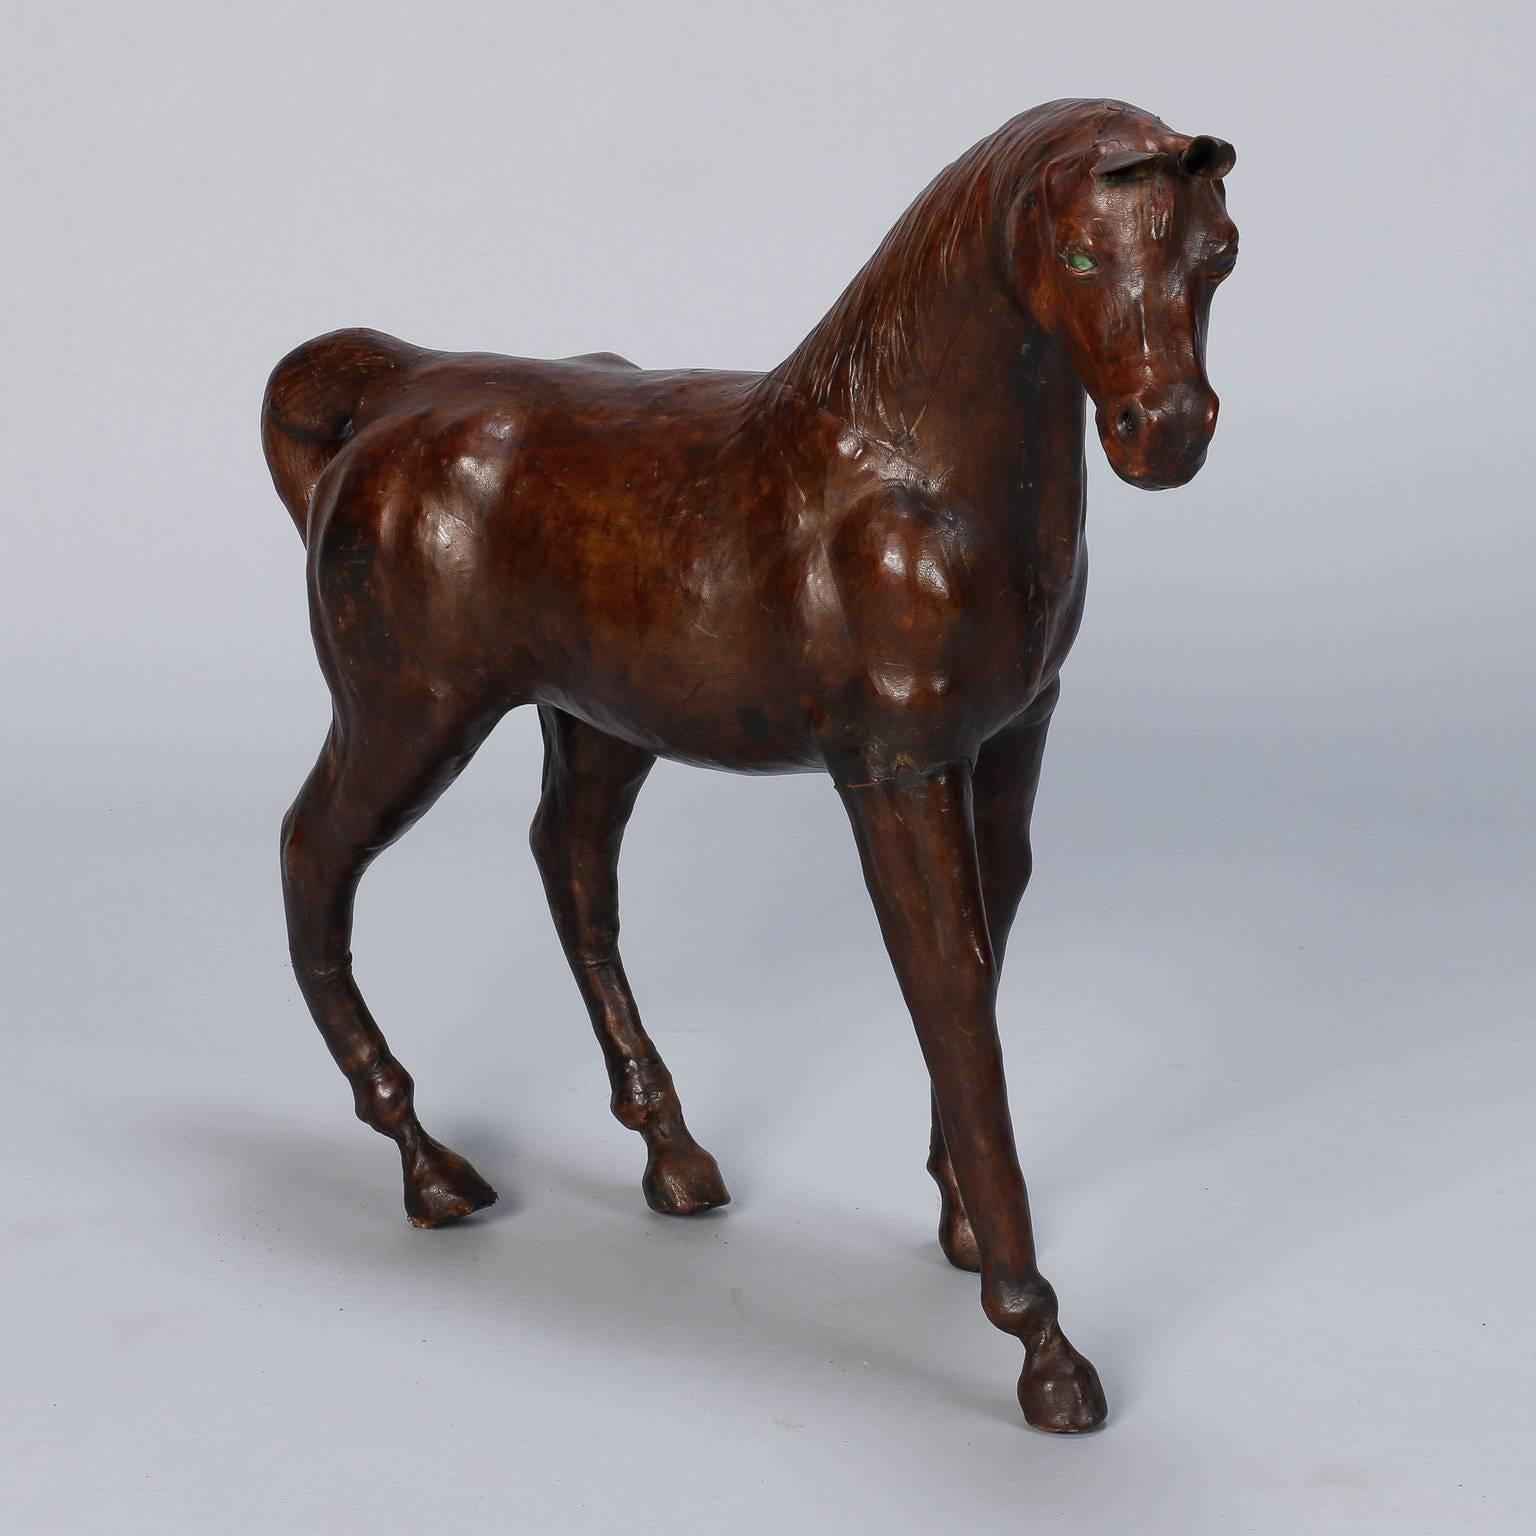 Circa 1970s horse form is covered in rich brown leather. Nice size at over two feet tall and long.
